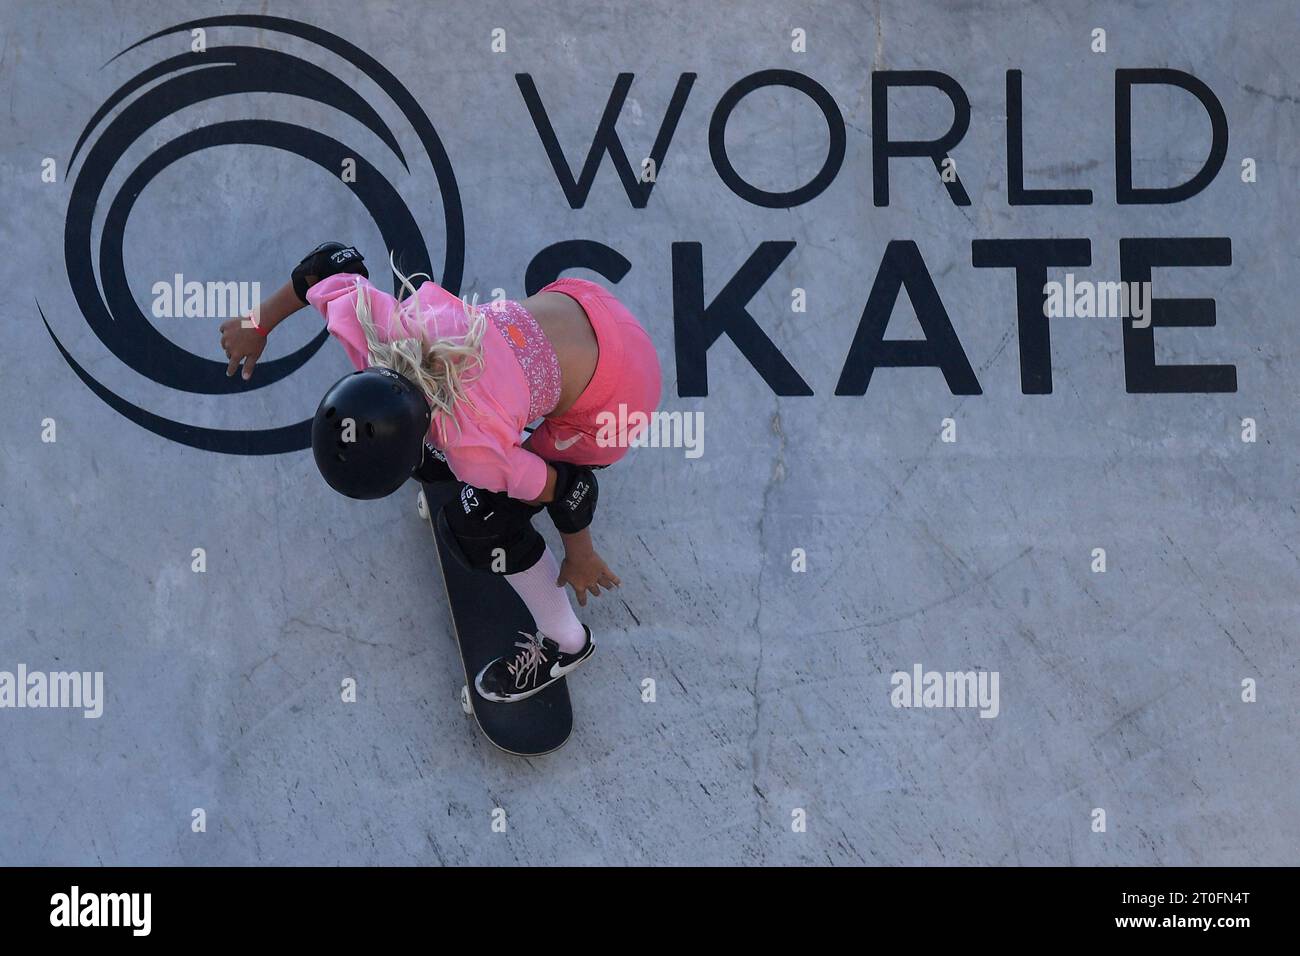 Lido Di Ostia, Rome, Ita. 06th Oct, 2023. Heili Sirvio of Finland warms up during the 2023 Skateboarding Park World Championship women's quarterfinals practice, a qualifying event for Paris Olympic Games, at The Spot Skatepark in Lido di Ostia, Rome, Italy, October 6th, 2023. Credit: Insidefoto di andrea staccioli/Alamy Live News Stock Photo